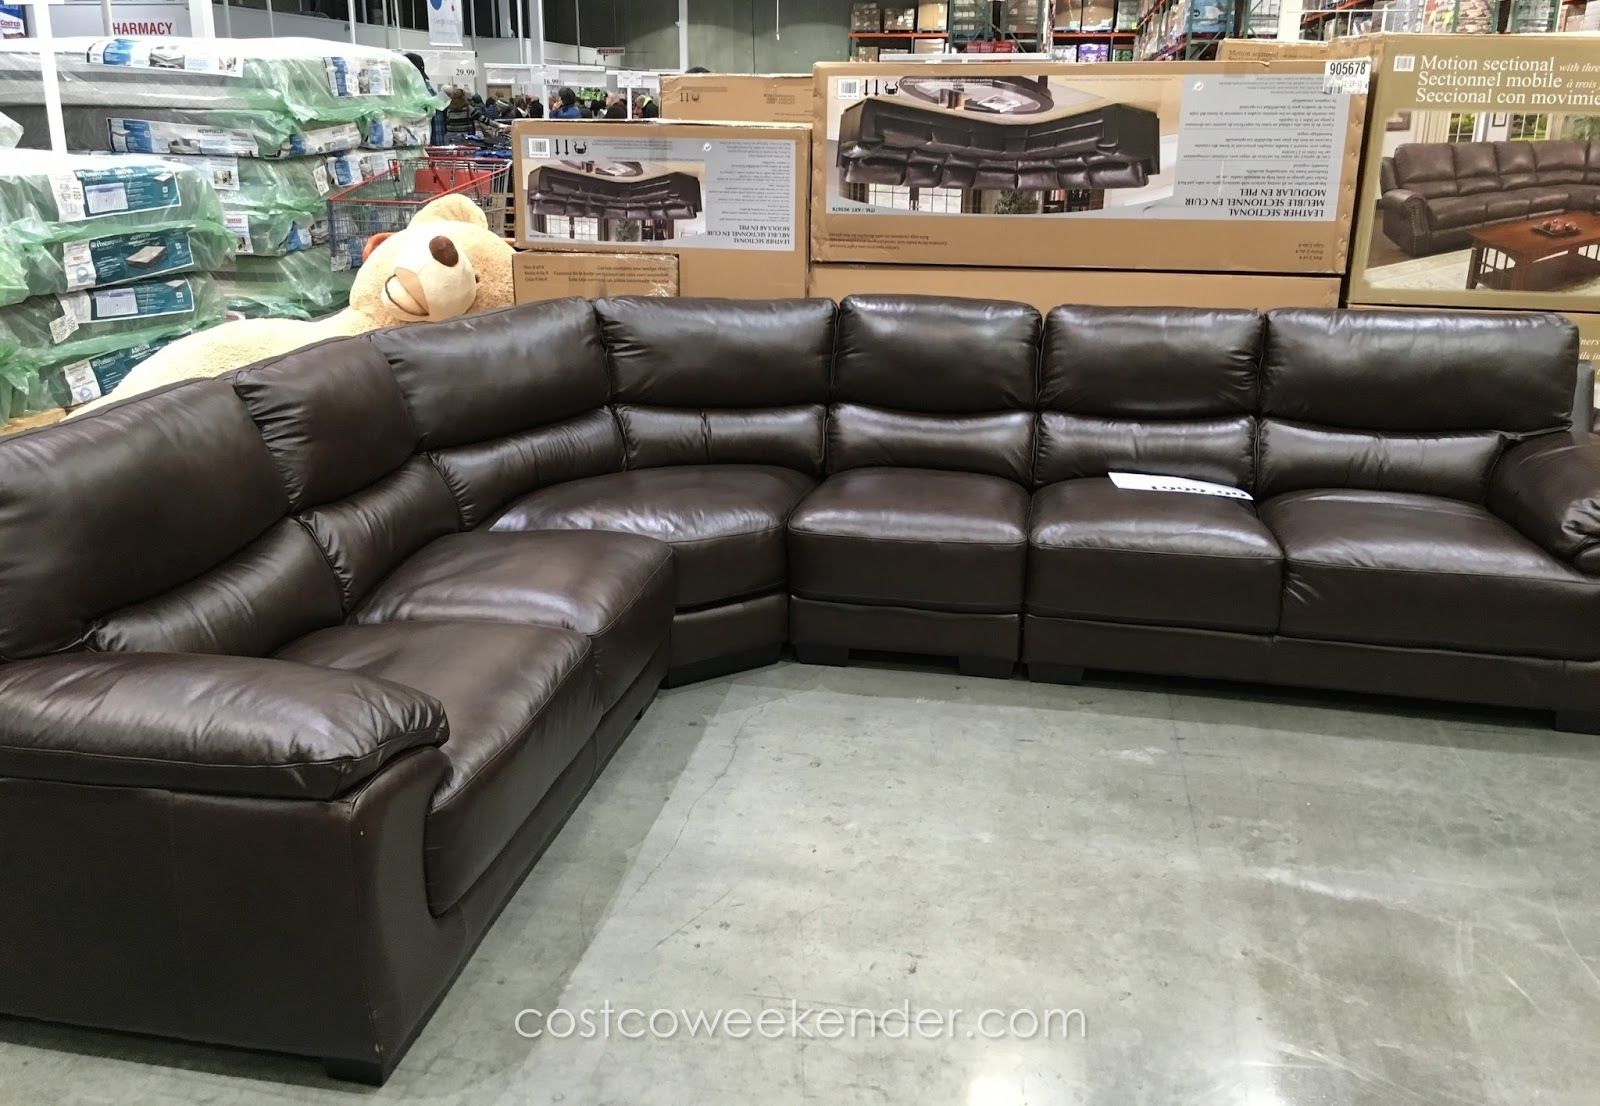 Marks & Cohen Colton Leather Sectional | Costco Weekender Throughout Cohen Down 2 Piece Sectionals (View 14 of 30)